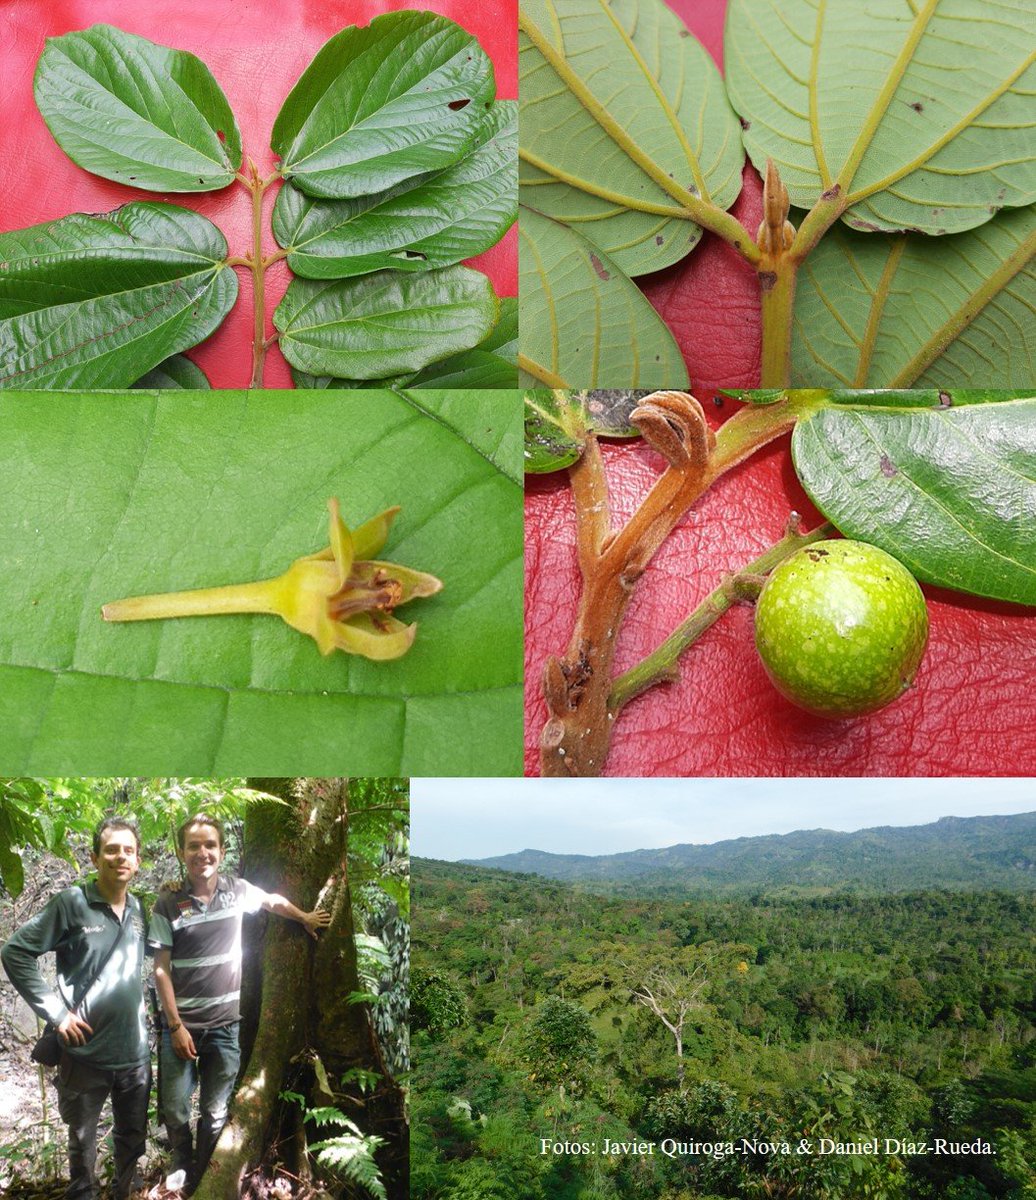 With the world's attention on the Amazon, the last forests of the Andes harbour the greatest concentration of endemic, endangered and vulnerable species on Earth. Here is one more - Caryodaphnopsis carmensis. Newly discovered by science, long known to loggers, in Colombia.